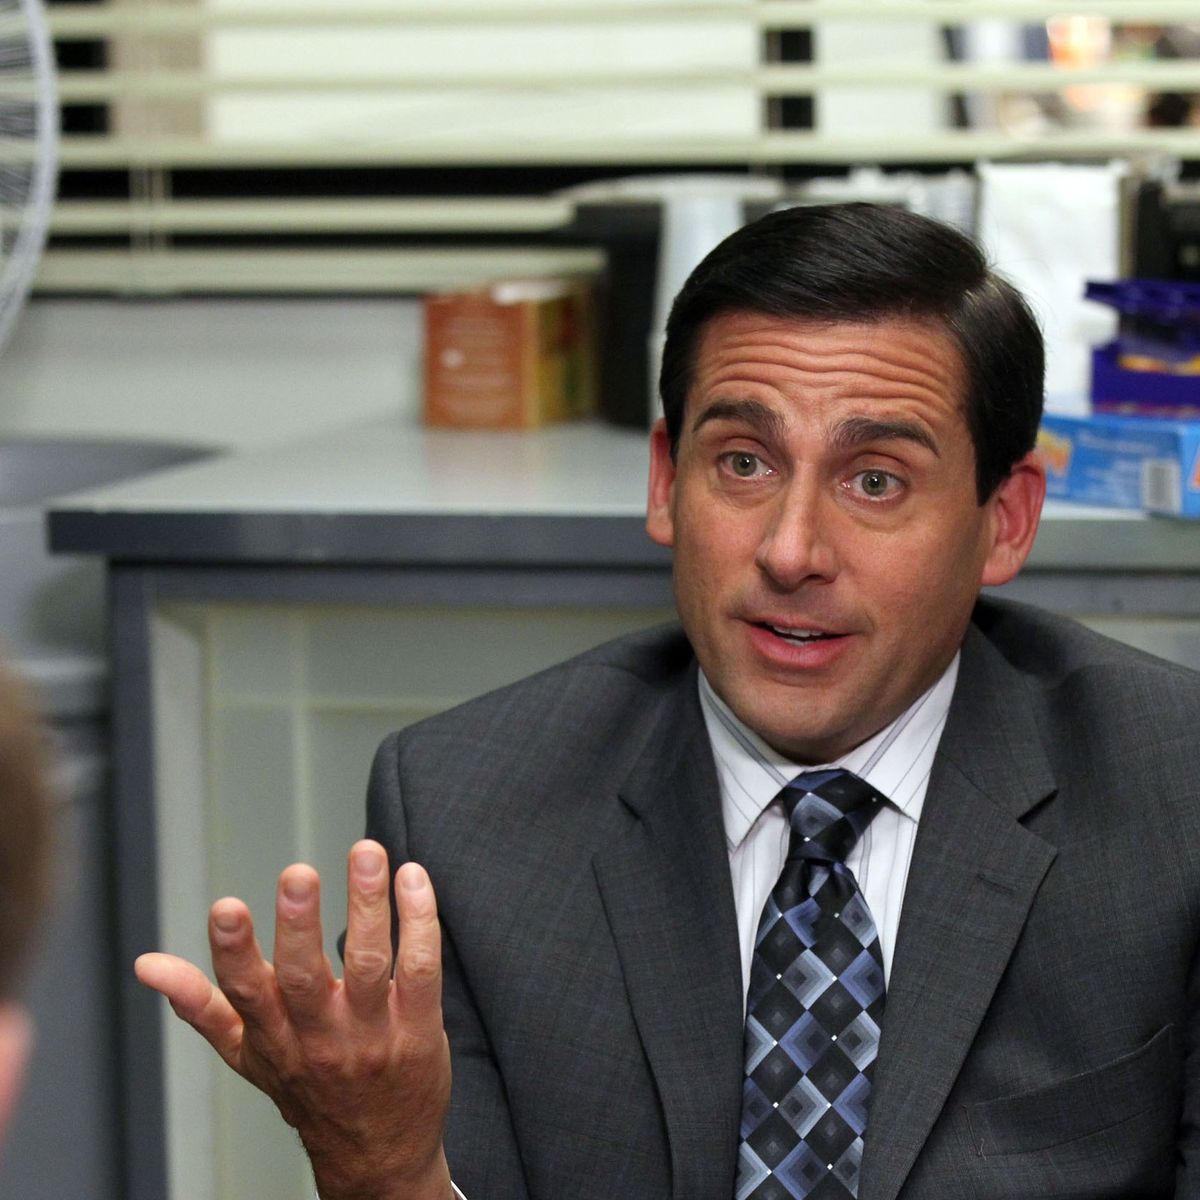 The Office': The Real Reason Michael Scott Hates Toby so Much